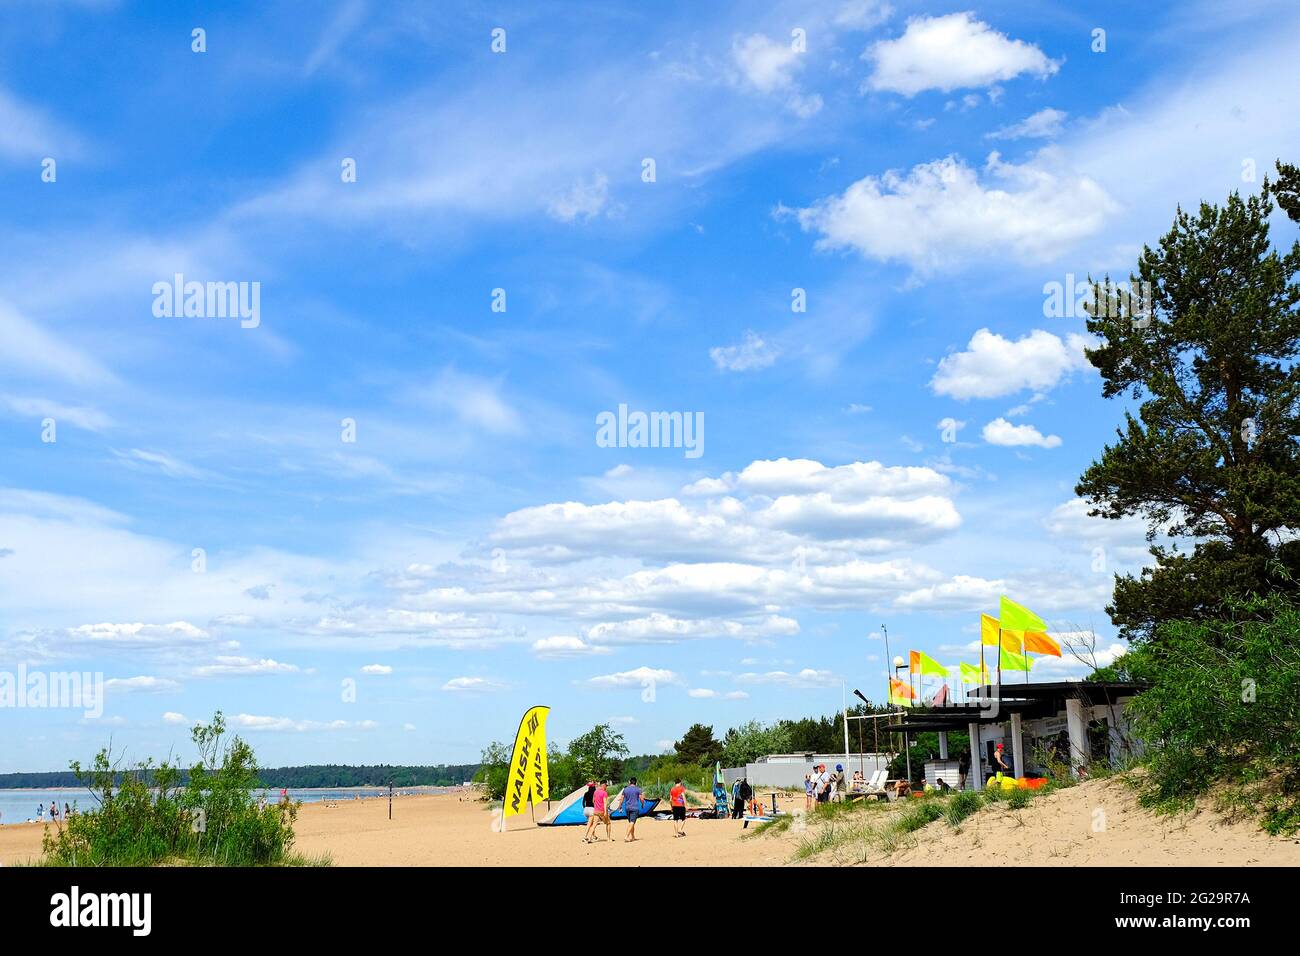 The beach of the surf school in retro style. The concept of a lifestyle of sports activity. The concept of a happy family. The concept of a summer bea Stock Photo